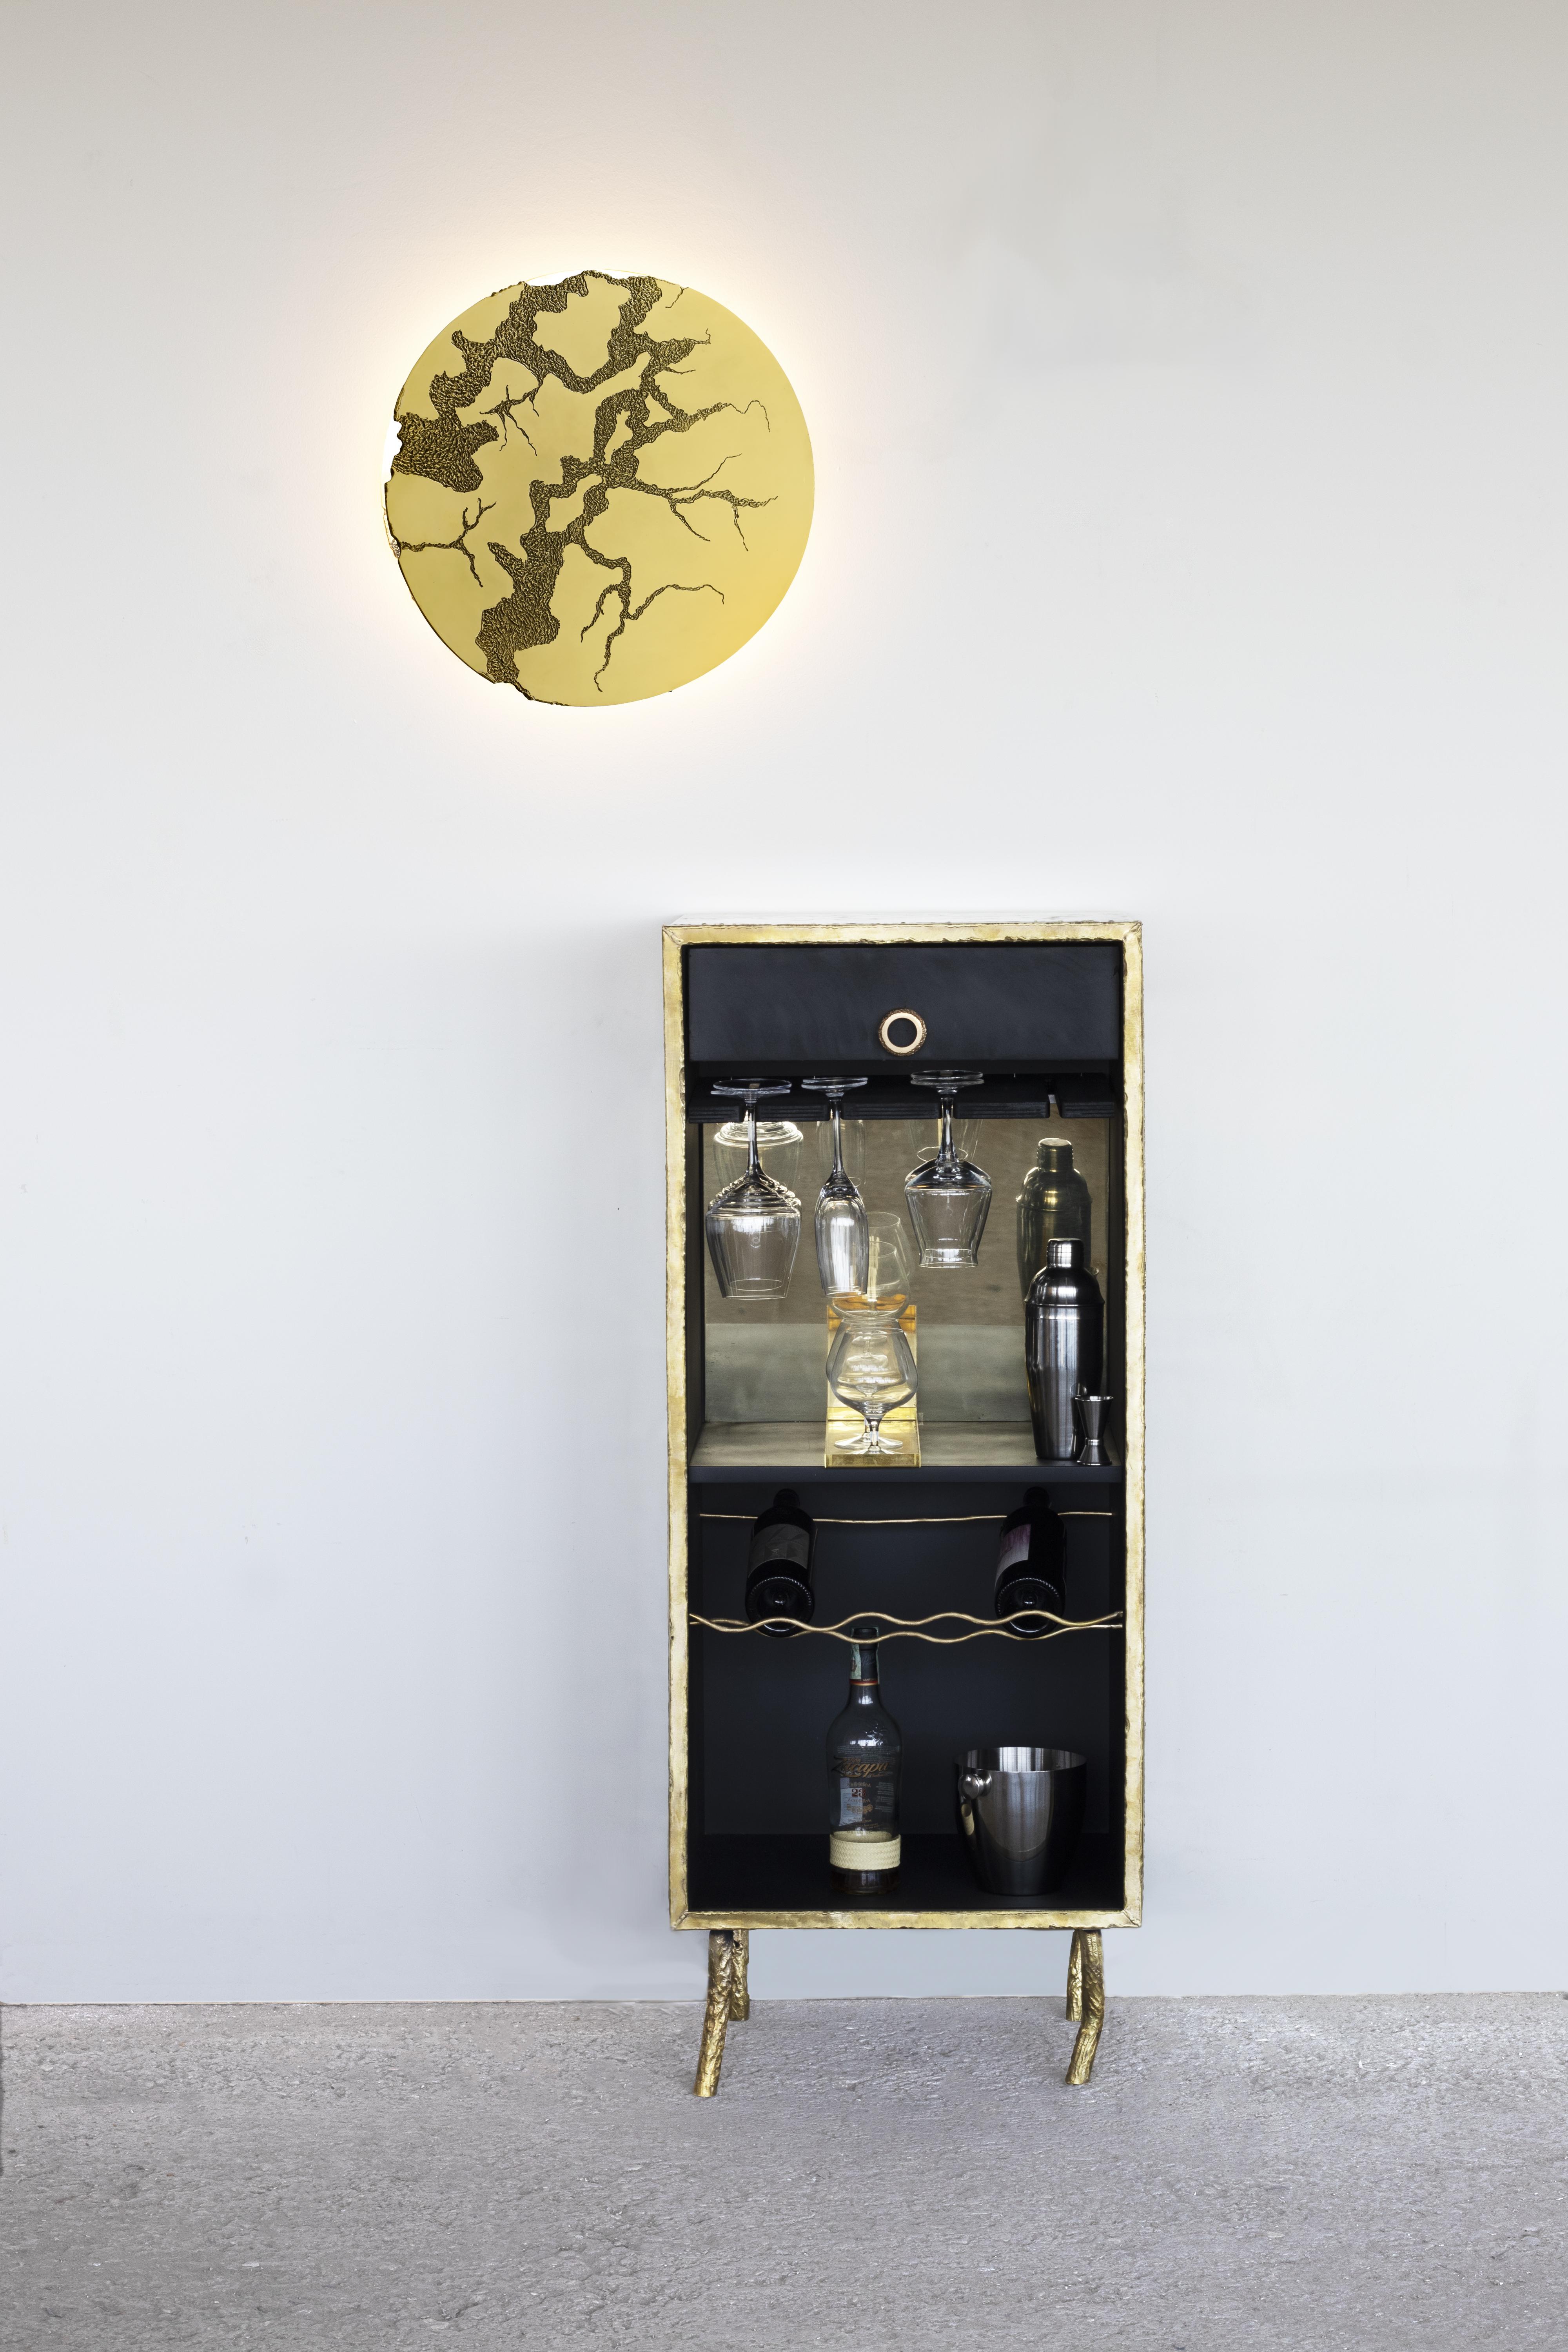 Brass hand-sculpted Dry Bar by Samuel Costantini
Entirely handmade by the artist
Title: Gate Dry Bar
Edition 9 + 1 AP
Measures: W50 cm x D 40 cm x H 150 cm.

This cabinet made of brass, with a wooden interior, is inspired by the majestic and